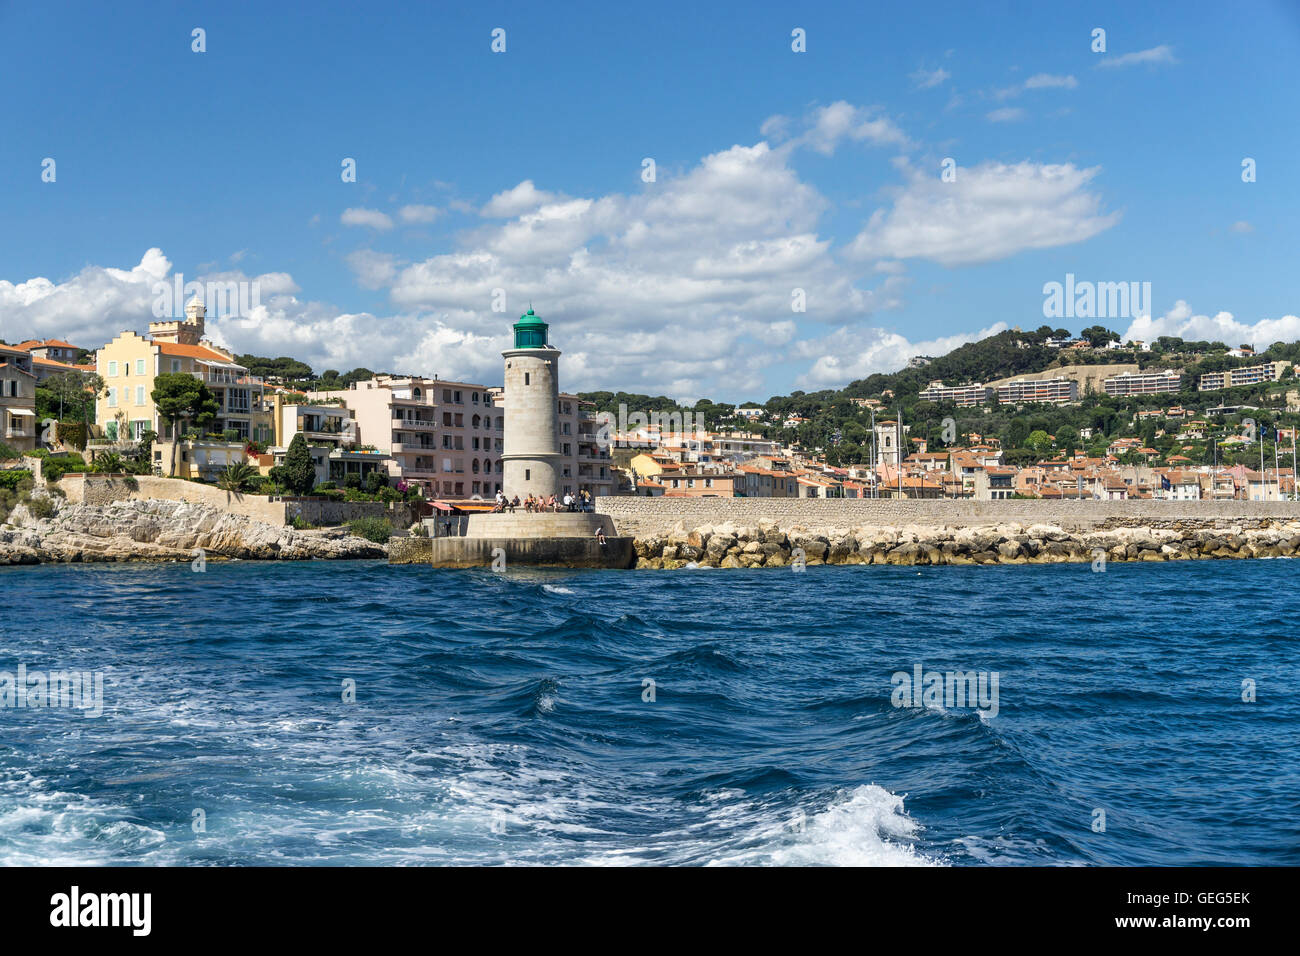 Phare, Cassis , Cote d Azur, French Riviera, France, Banque D'Images